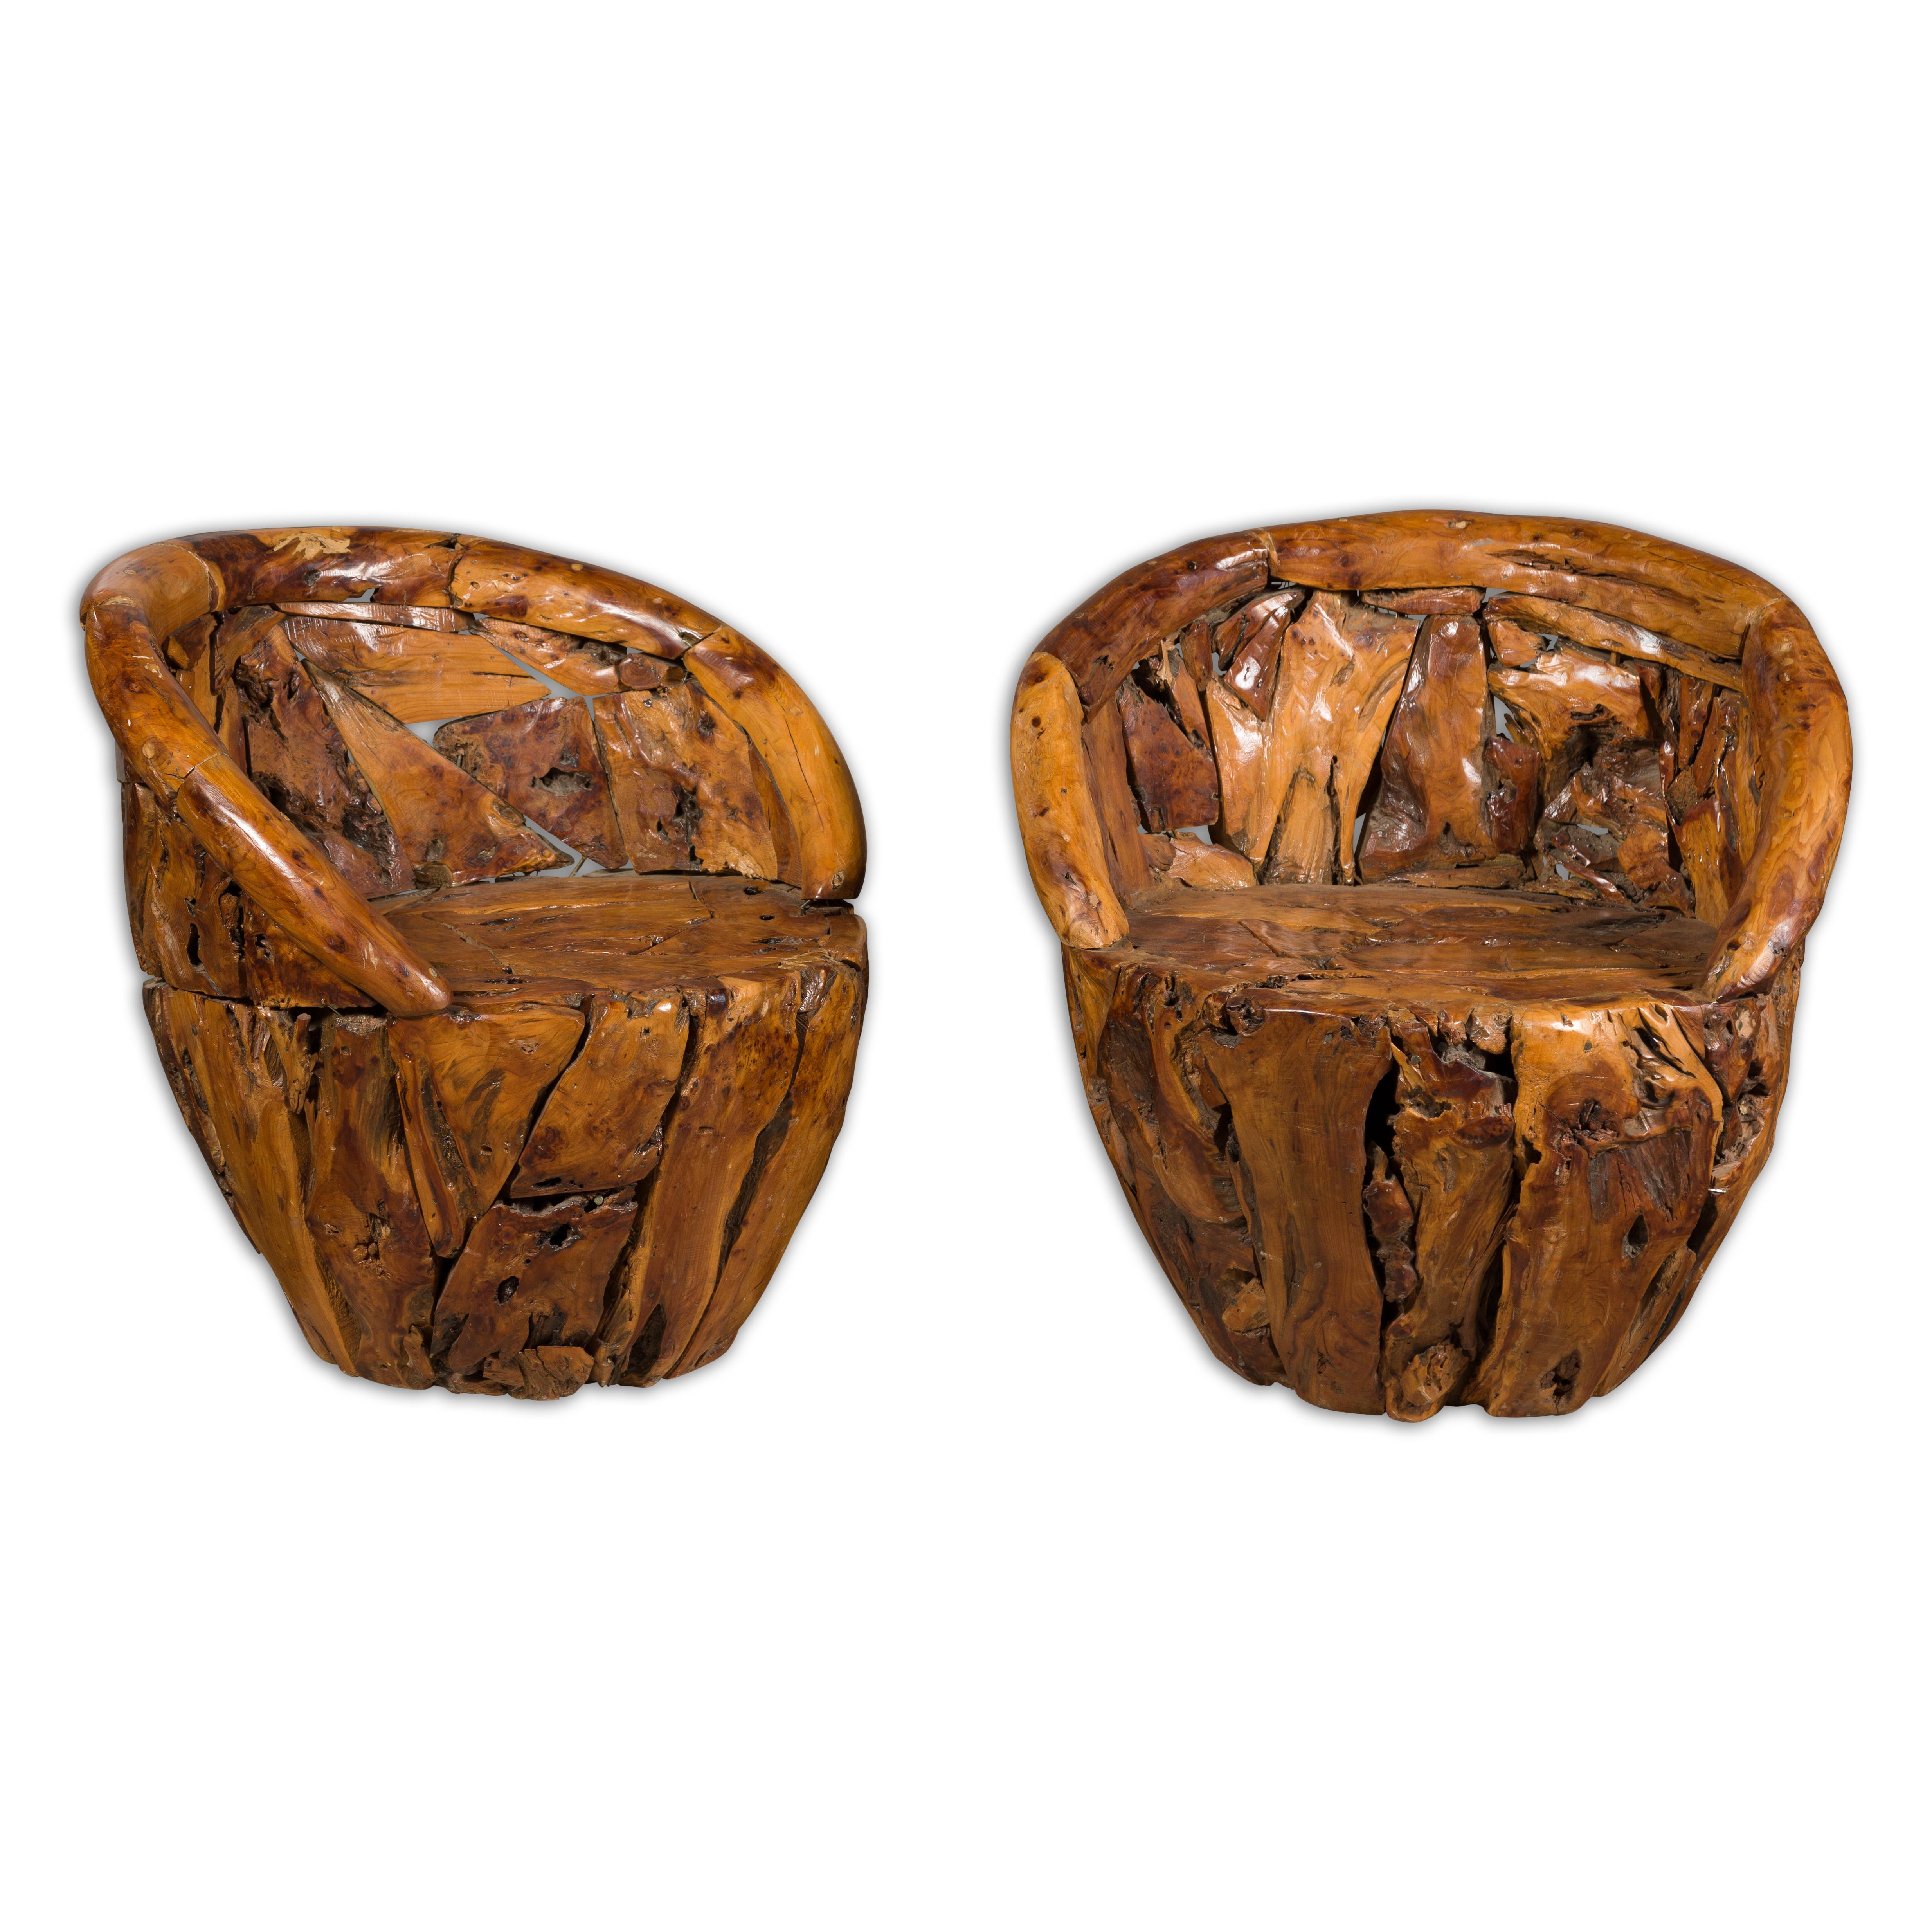 A vintage pair of American root wood armchairs with wraparound backs and rustic character. Experience the raw allure of nature and craftsmanship with this pair of vintage American root wood armchairs. Imbued with a rich history and character, these